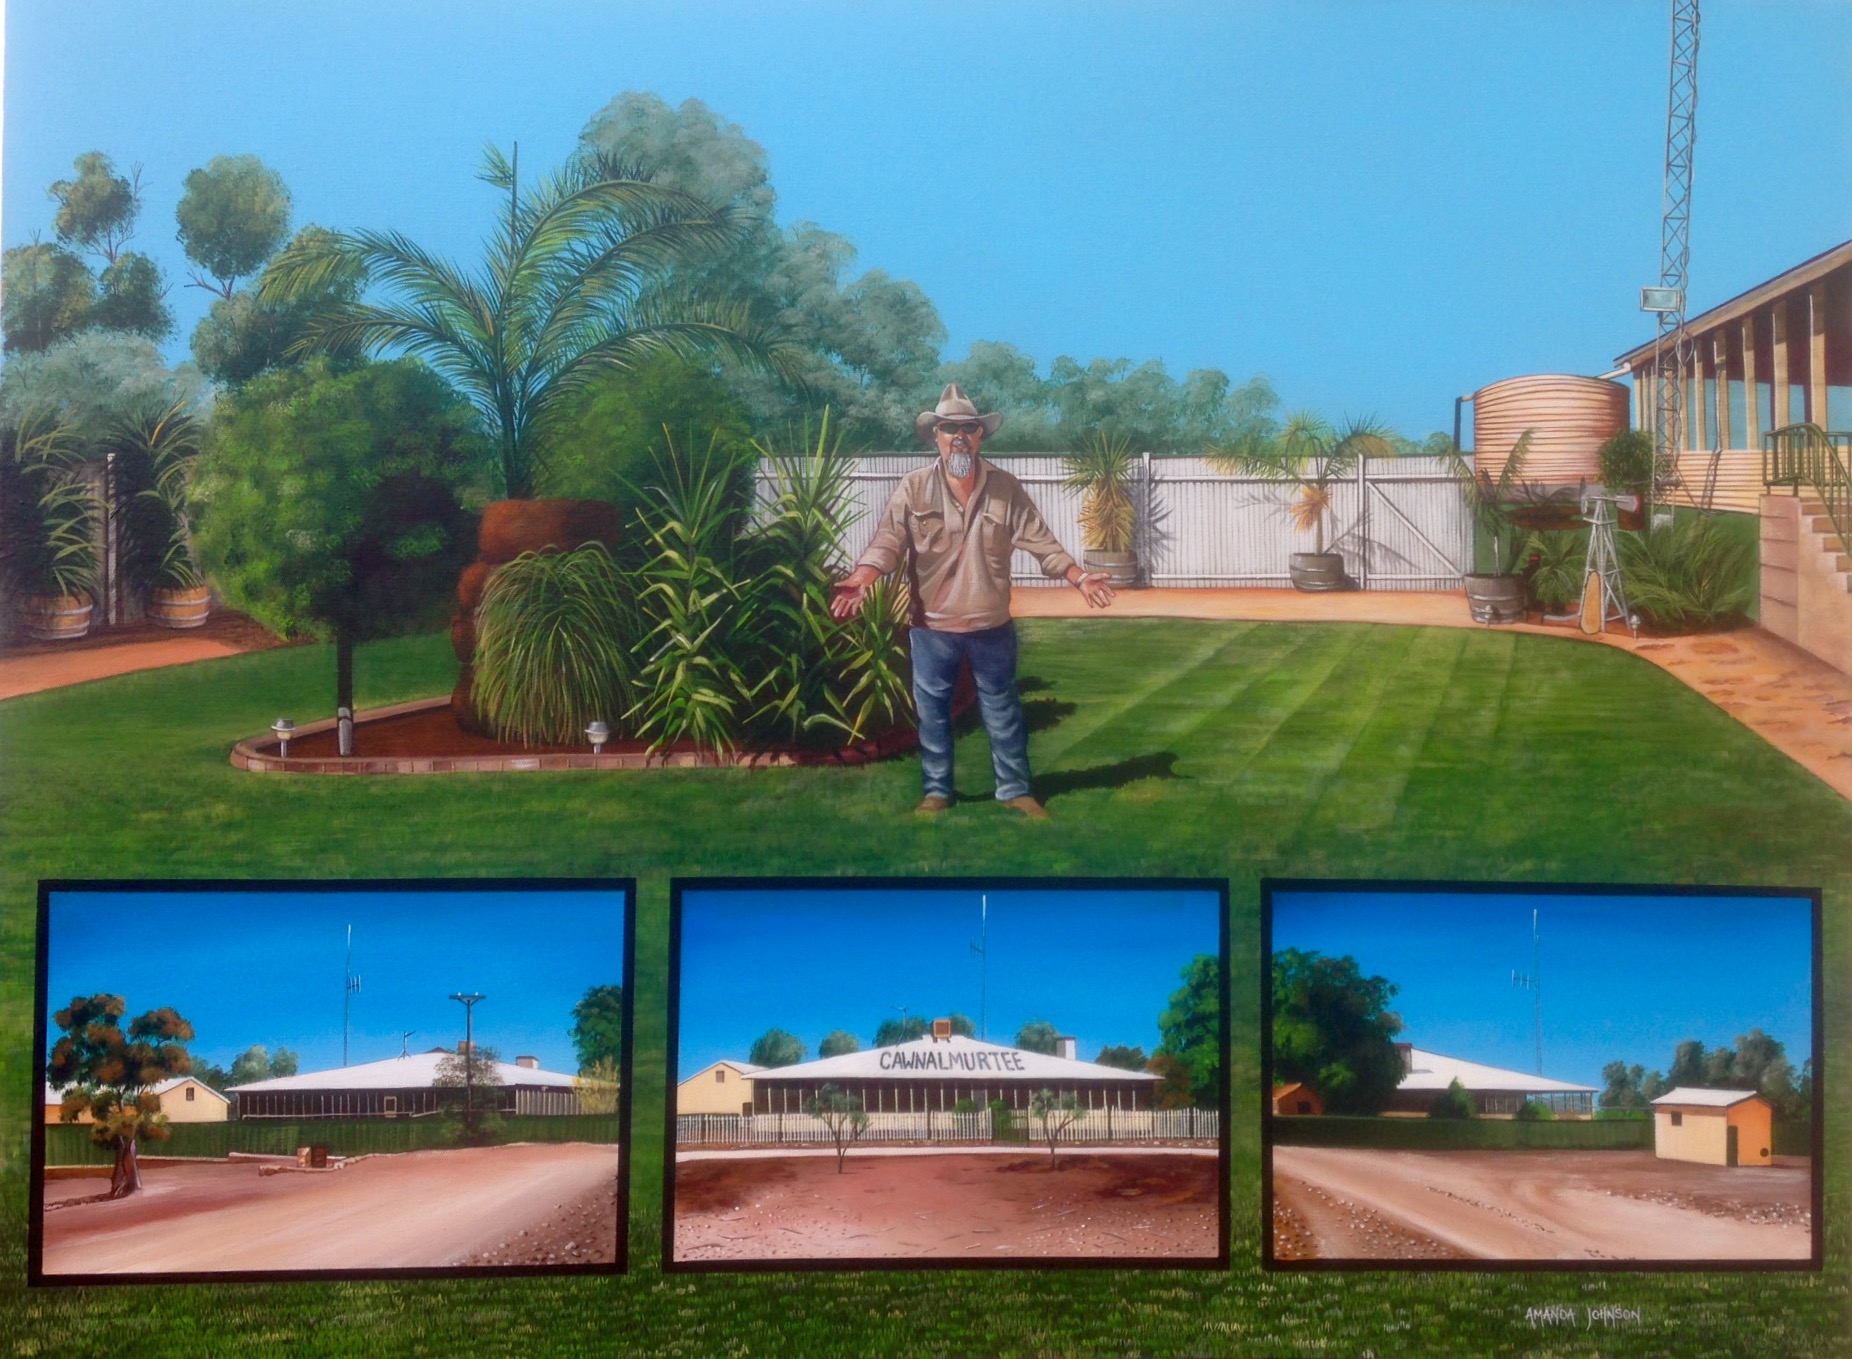 Tom Finch stands in front of his outback property showing off the incredible garden he's managed to create from the dry conditions. Along the bottom of the painting are three smaller paintings showing the front of the property and the arid ground